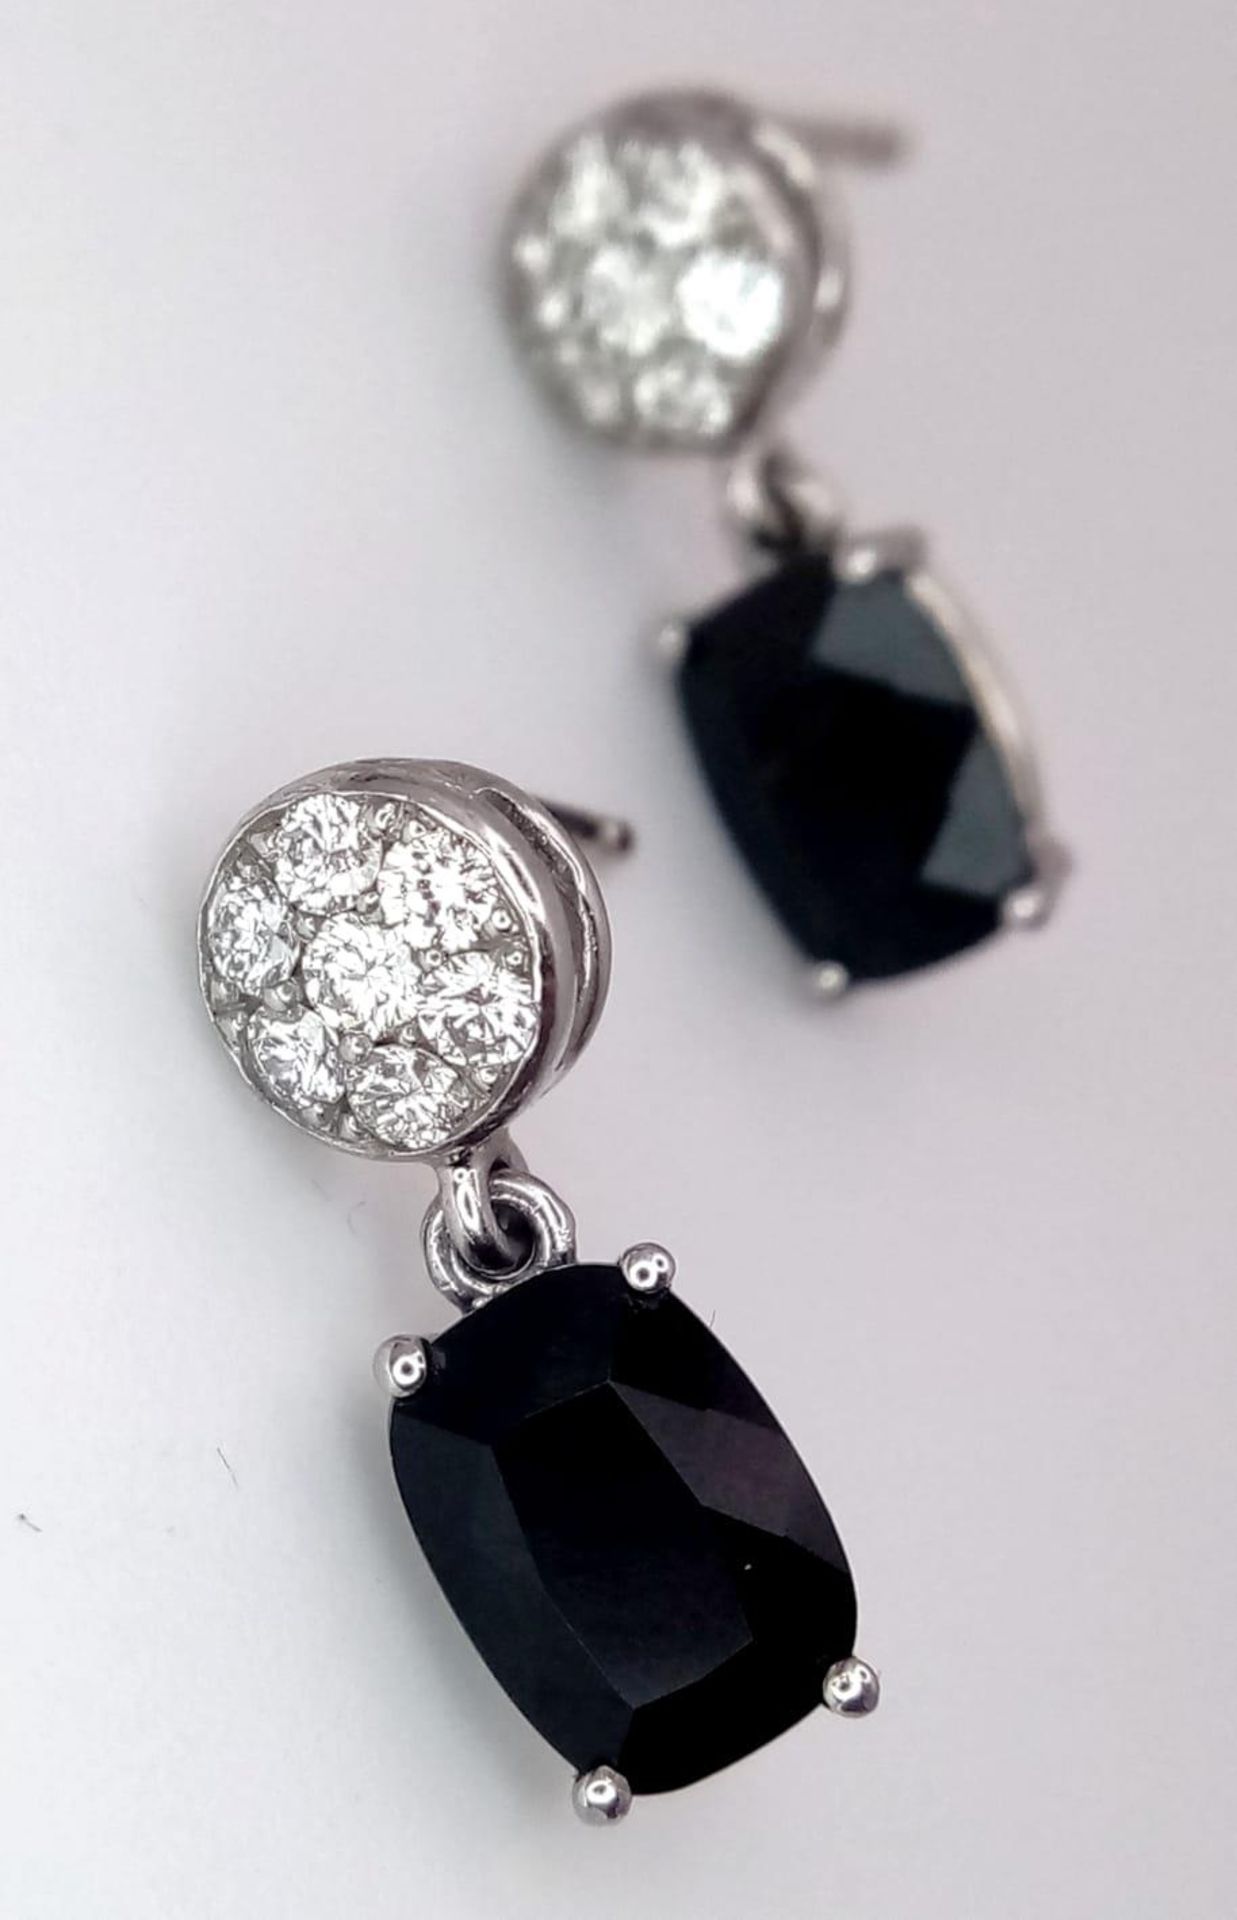 A Pair of 18K Diamond and Onyx Earrings. Diamond clusters and rectangular cut onyx. No backs. With